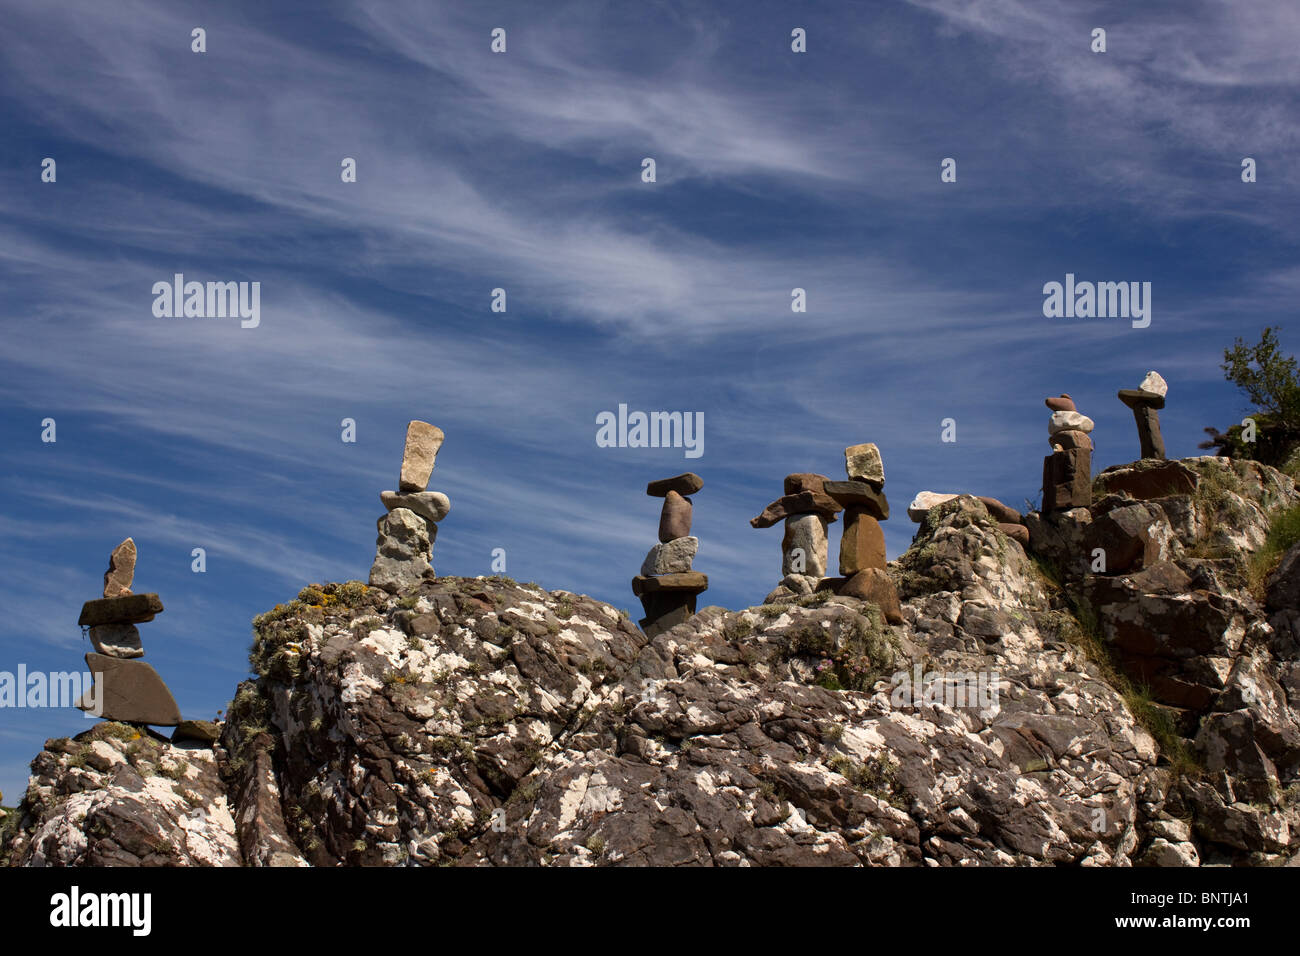 A row of rock sculptures made from balanced rocks and stones against a blue sky at Ord Bay on the Isle of Skye Stock Photo